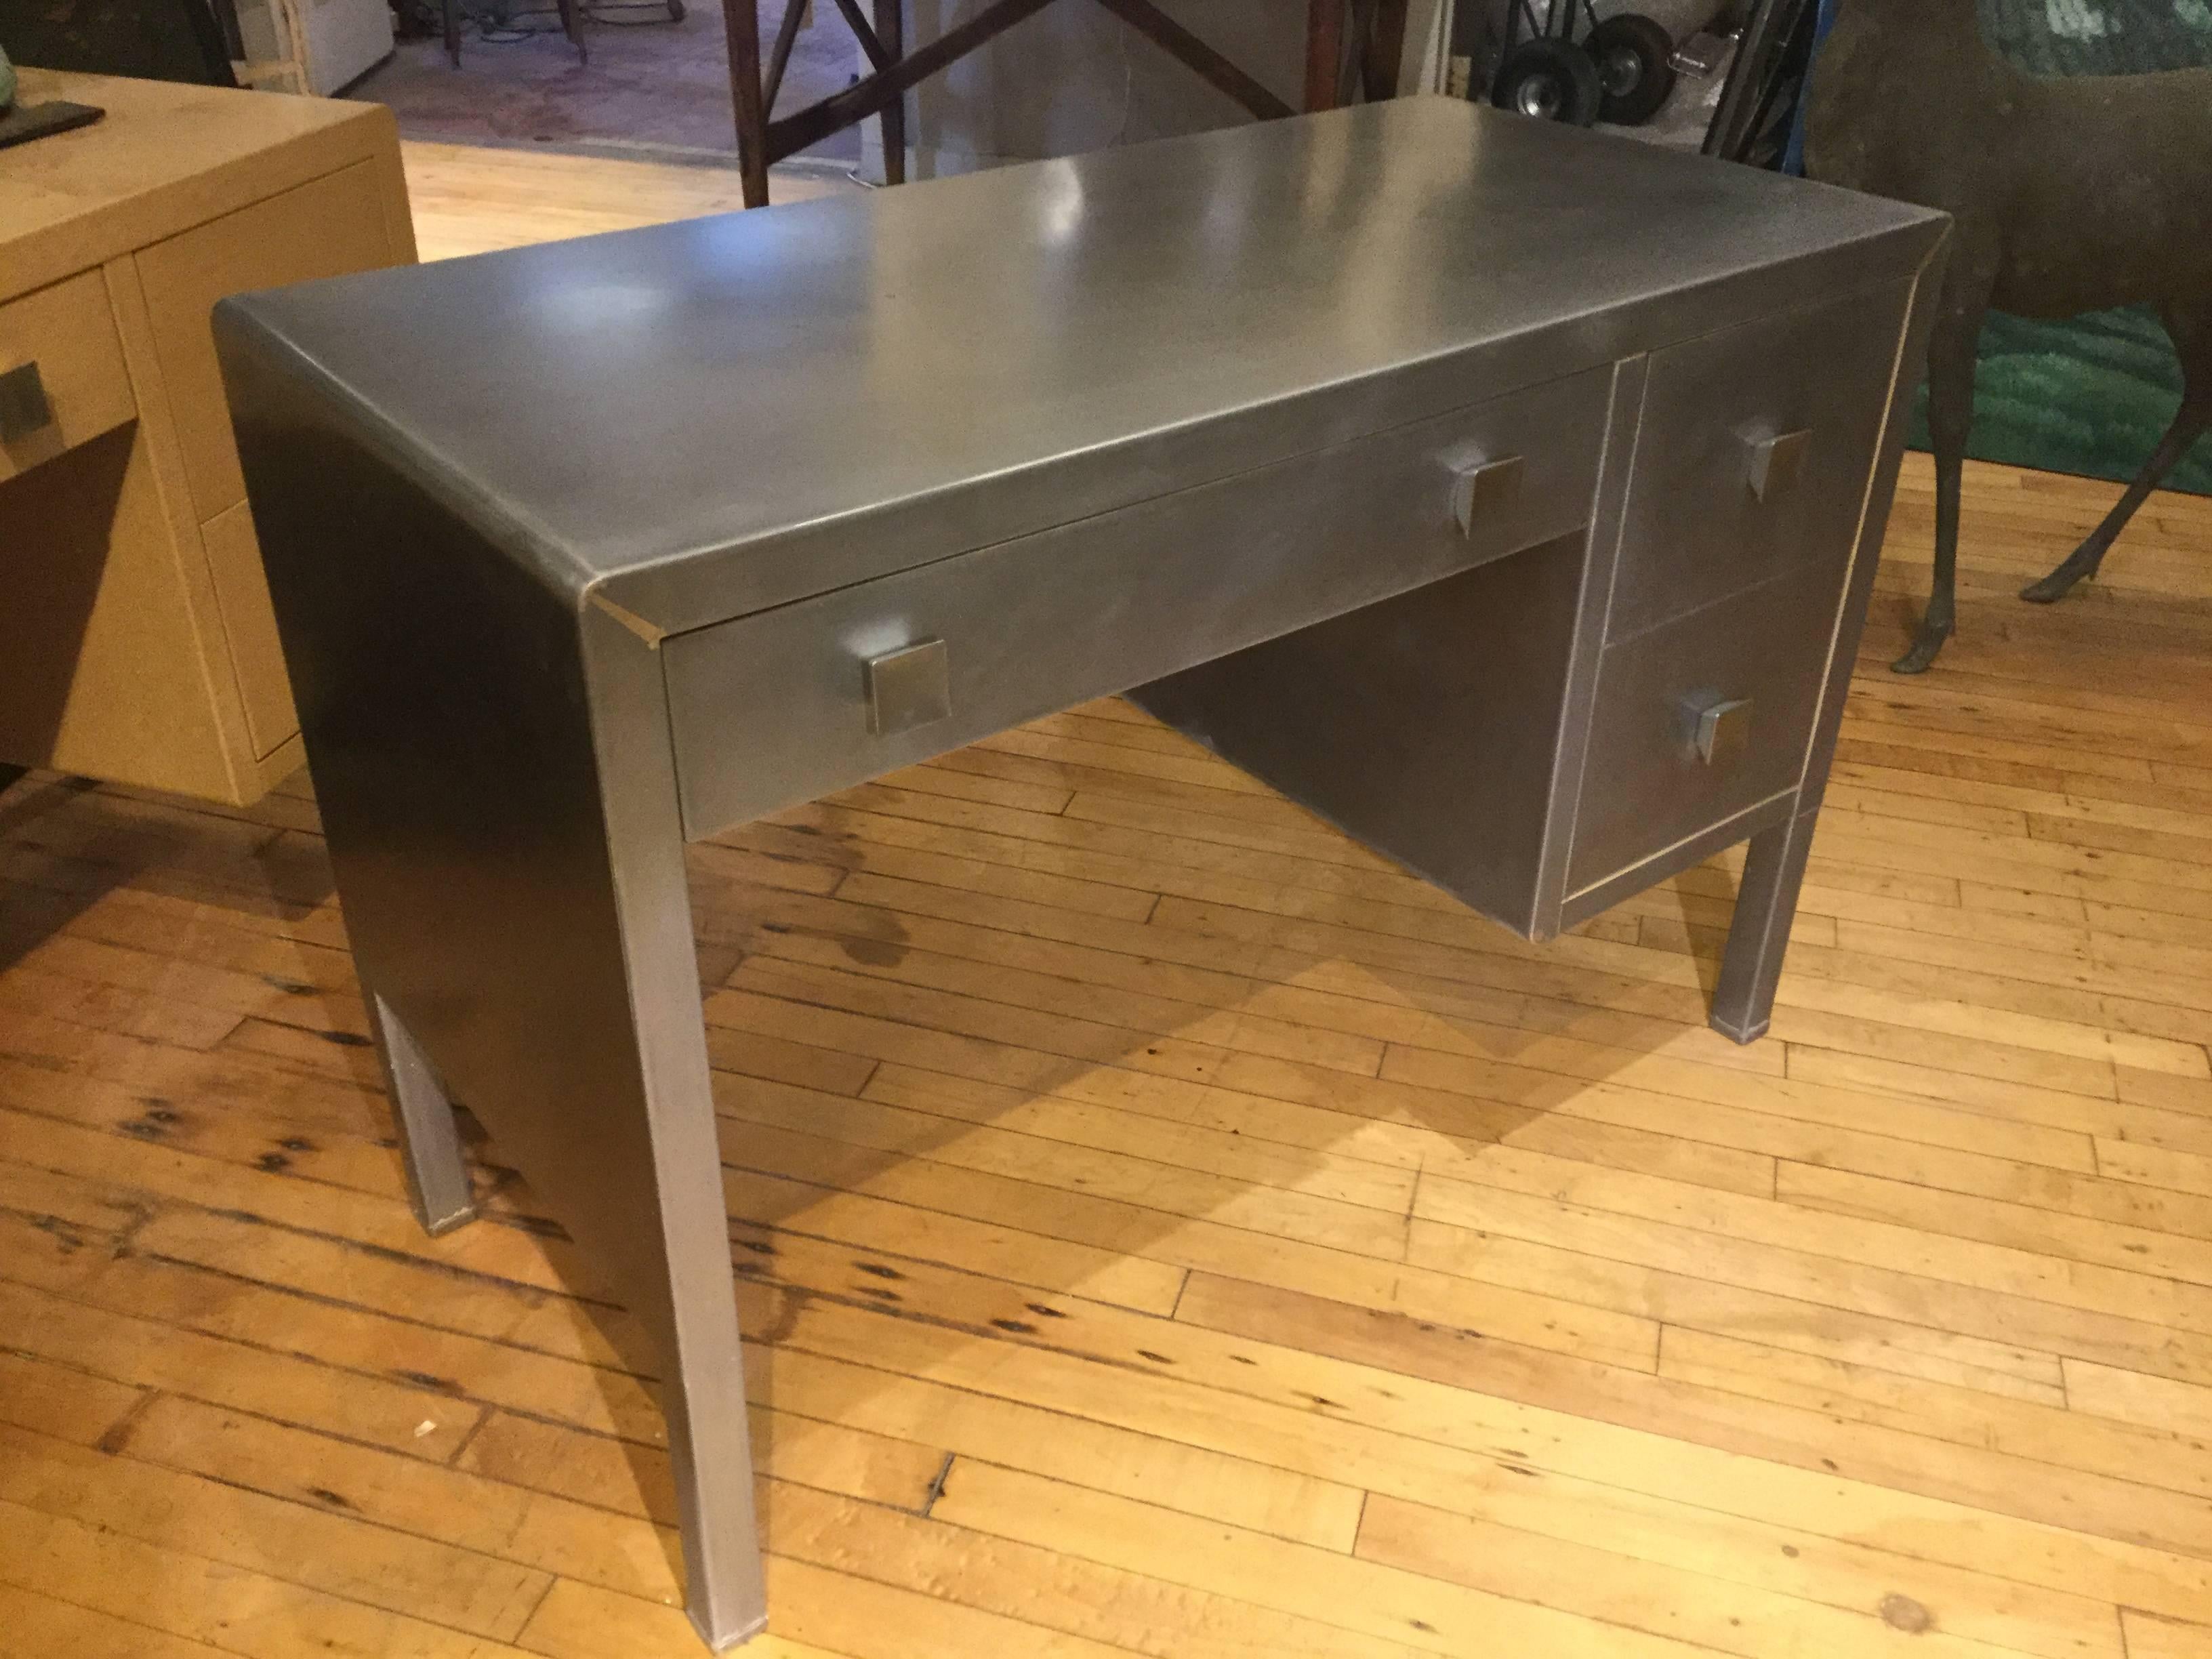 Mid-Century Modern steel desk. Originally these desks by Simmons and designed by Bel Geddes were painted in a blond faux wood finish, but stripped they take on an elegant Industrial look. Great design. Drawers are all perfectly flush with surface